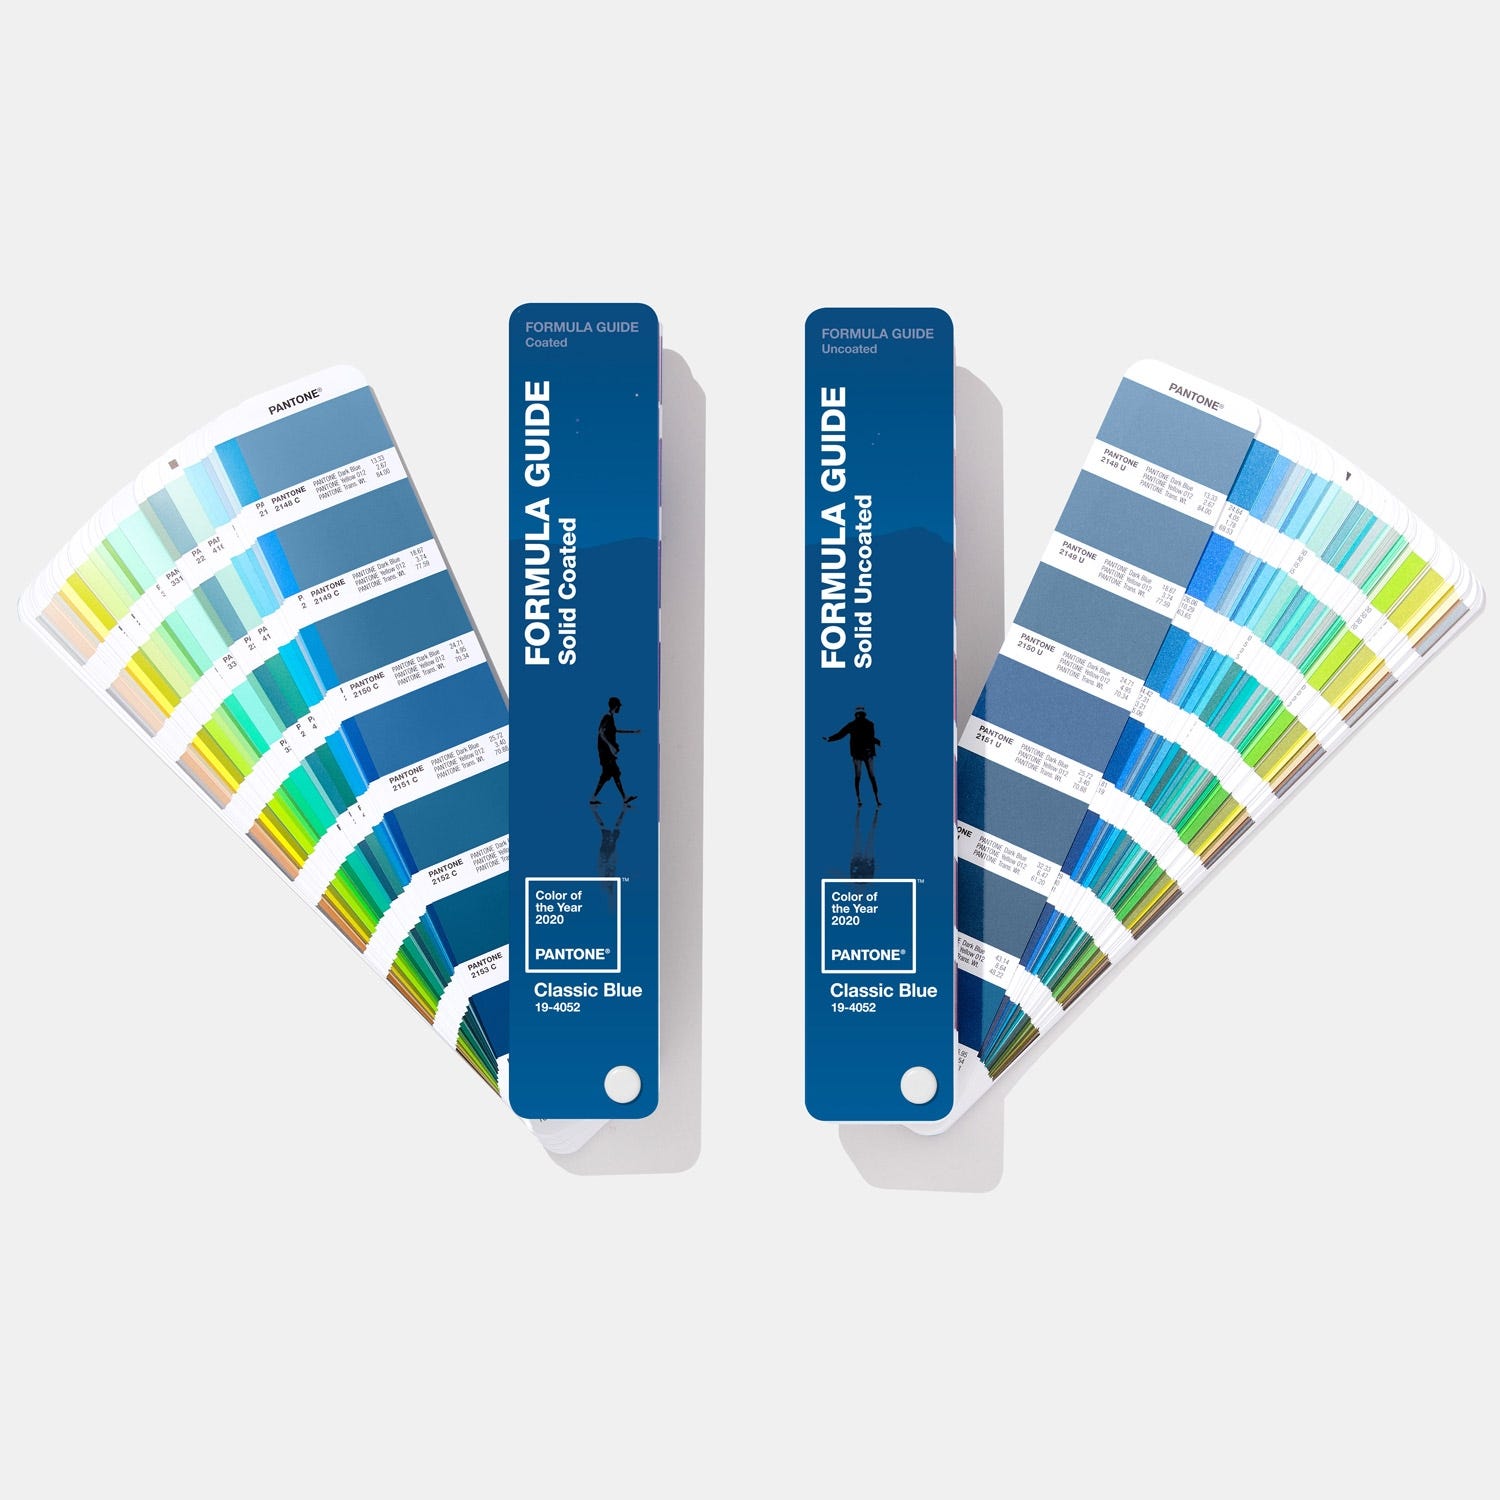 Limited Edition Formula Guide Coated and Uncoated, Pantone Color of the Year 2020 Classic Blue